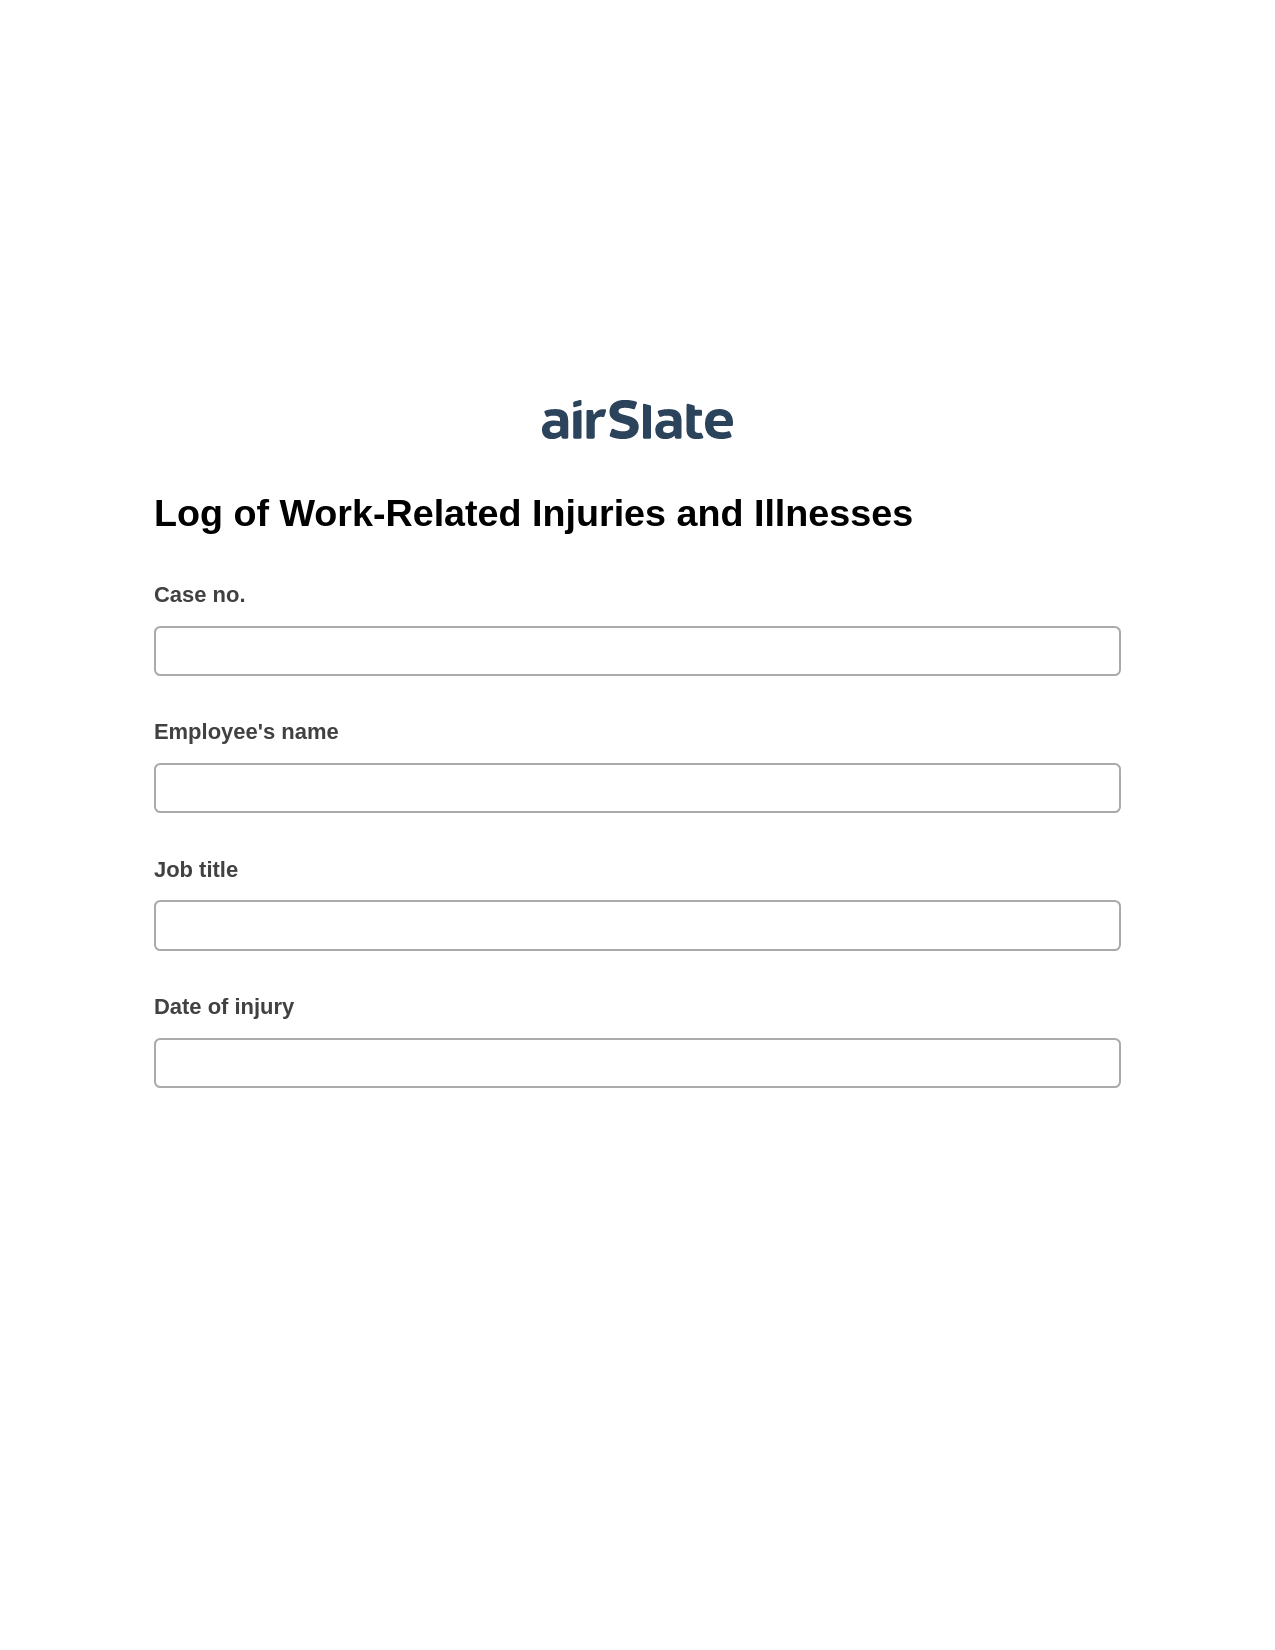 Multirole Log of Work-Related Injuries and Illnesses Pre-fill from another Slate Bot, Create Salesforce Record Bot, Archive to SharePoint Folder Bot